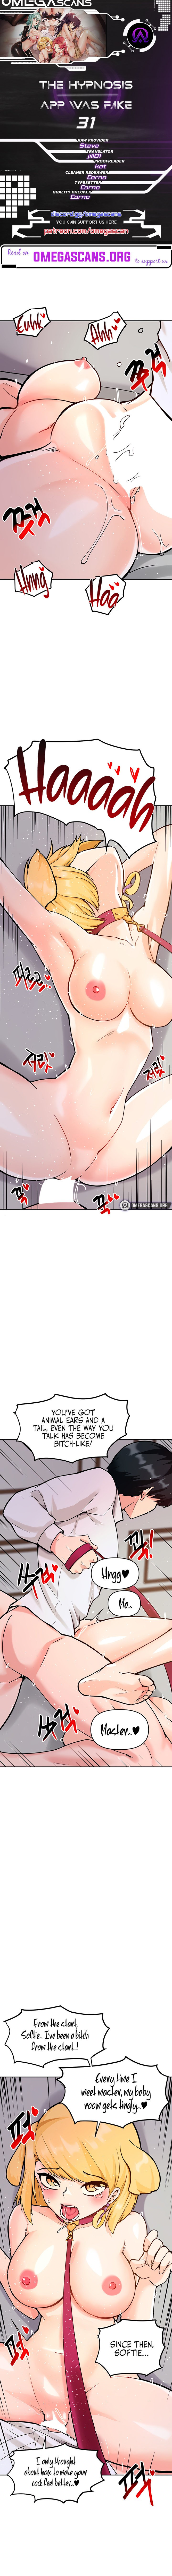 the-hypnosis-app-was-fake-chap-31-0